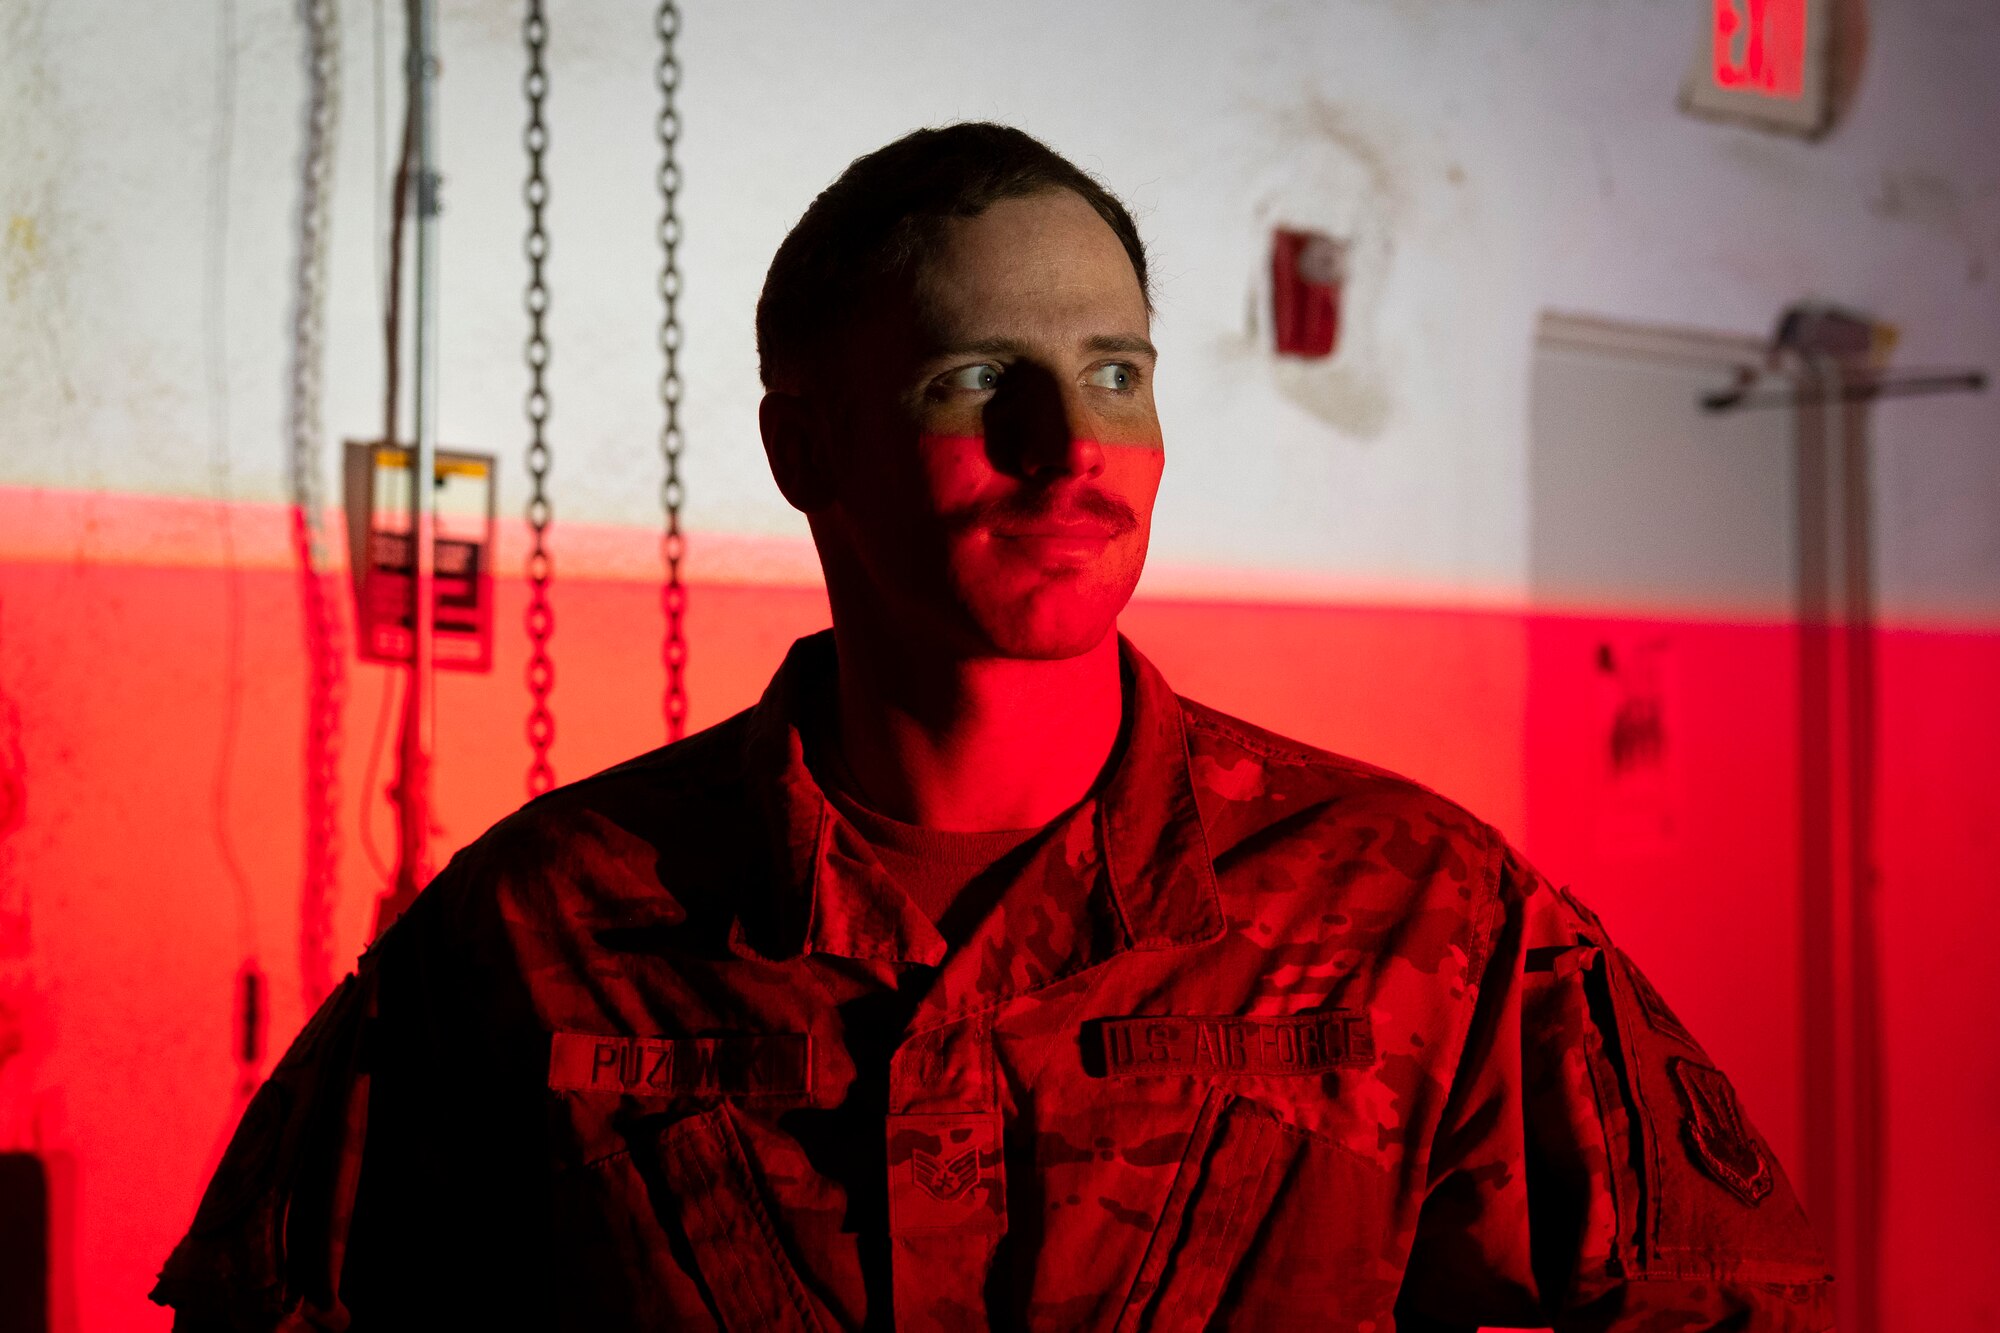 U.S. Air Force Staff Sgt. Sean Puzewski, 23rd Civil Engineer Squadron electrician, poses for a photo in front of an Expeditionary Aircraft Lighting System light during a training course at Holloman Air force Base, New Mexico, Dec. 14, 2023. The new EALS lighting system plays a key role in providing deployed environments with quick and reliable landing zones for a variety of aircraft. (U.S. Air Force photo by Airman 1st Class Isaiah Pedrazzini)